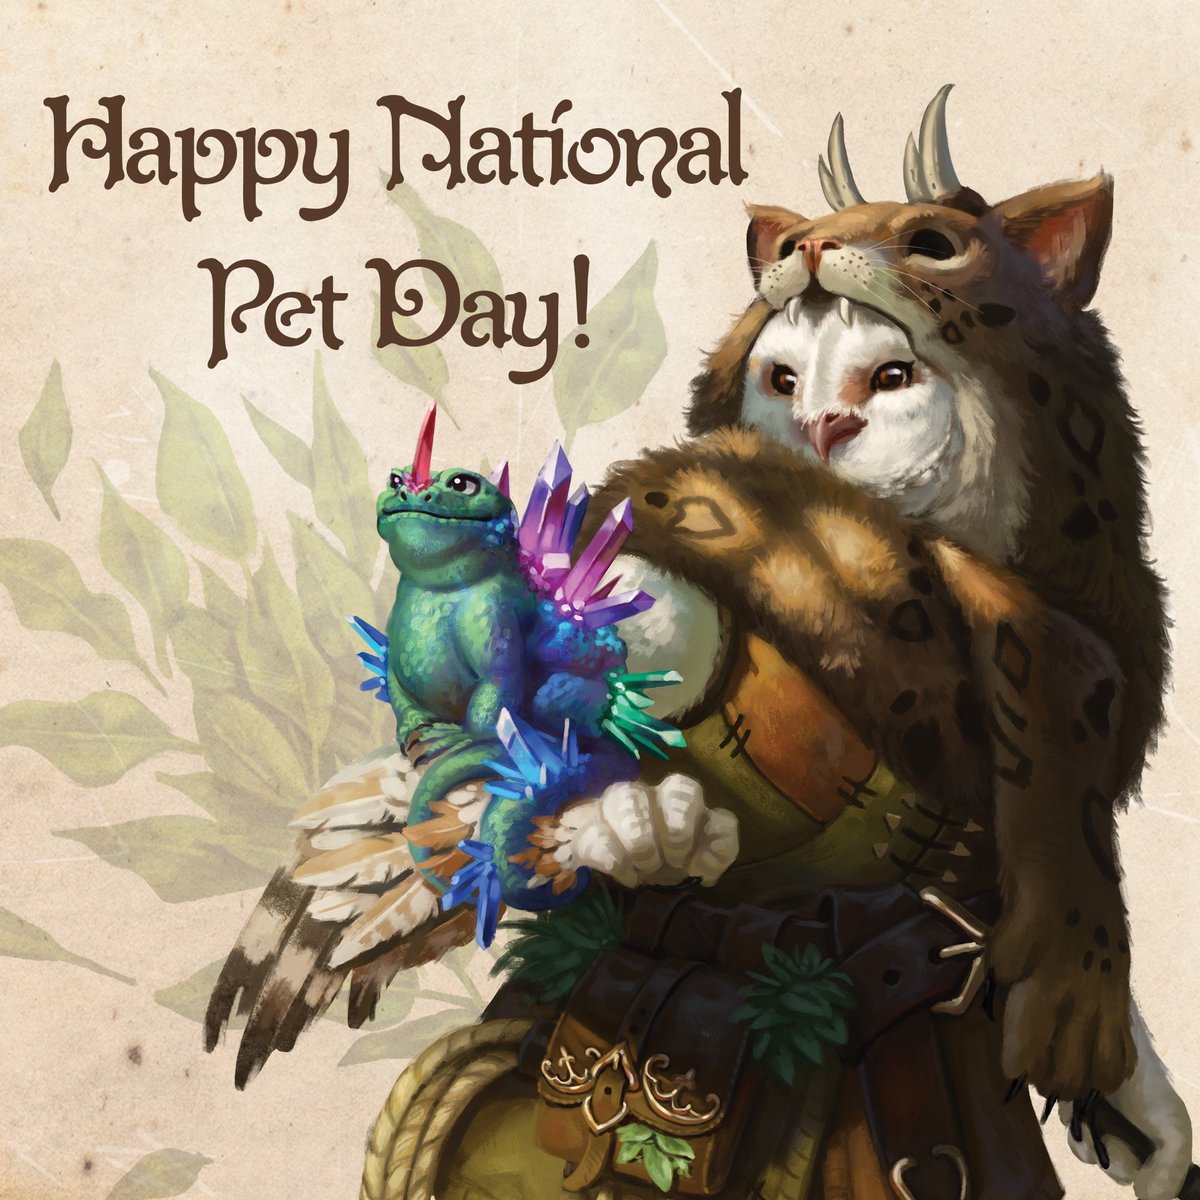 Happy National Pet Day! 🐾 Be sure to treat your animal companions extra special today! Strig Hunter Artwork by Christina Kraus (@ElbenherzArt) for Humblewood 🌳🦉